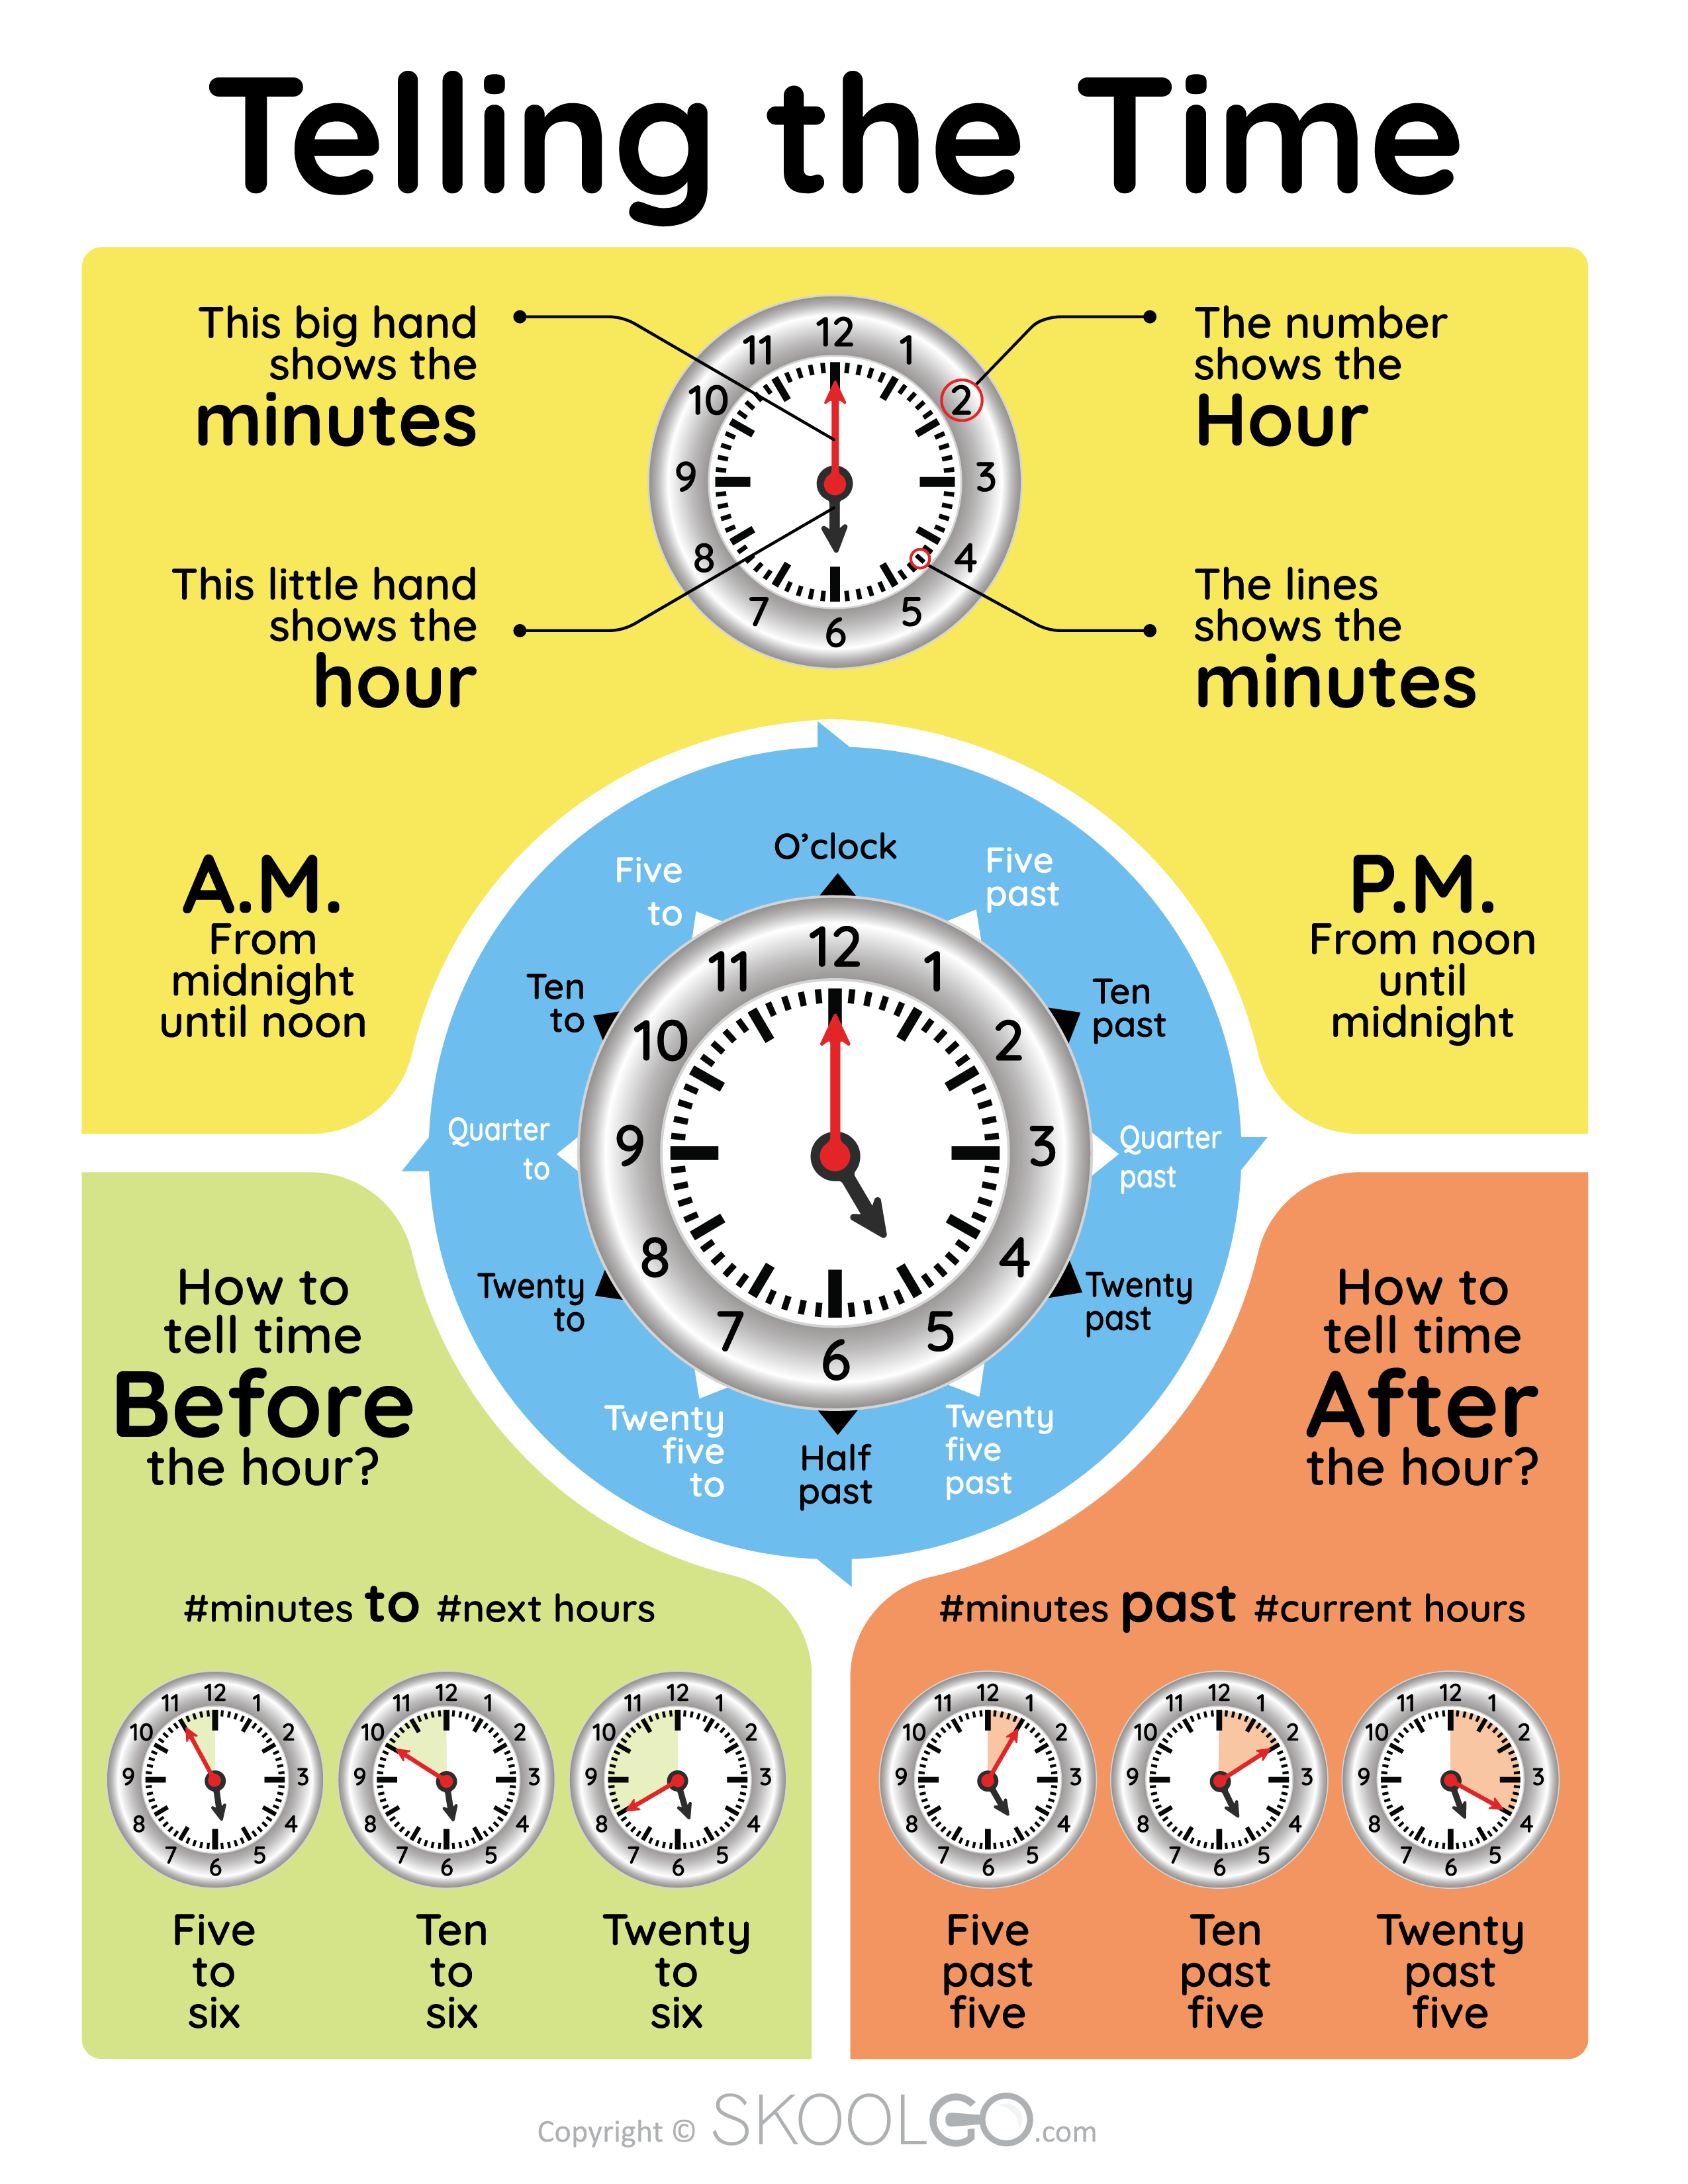 Telling the Time - Free Poster